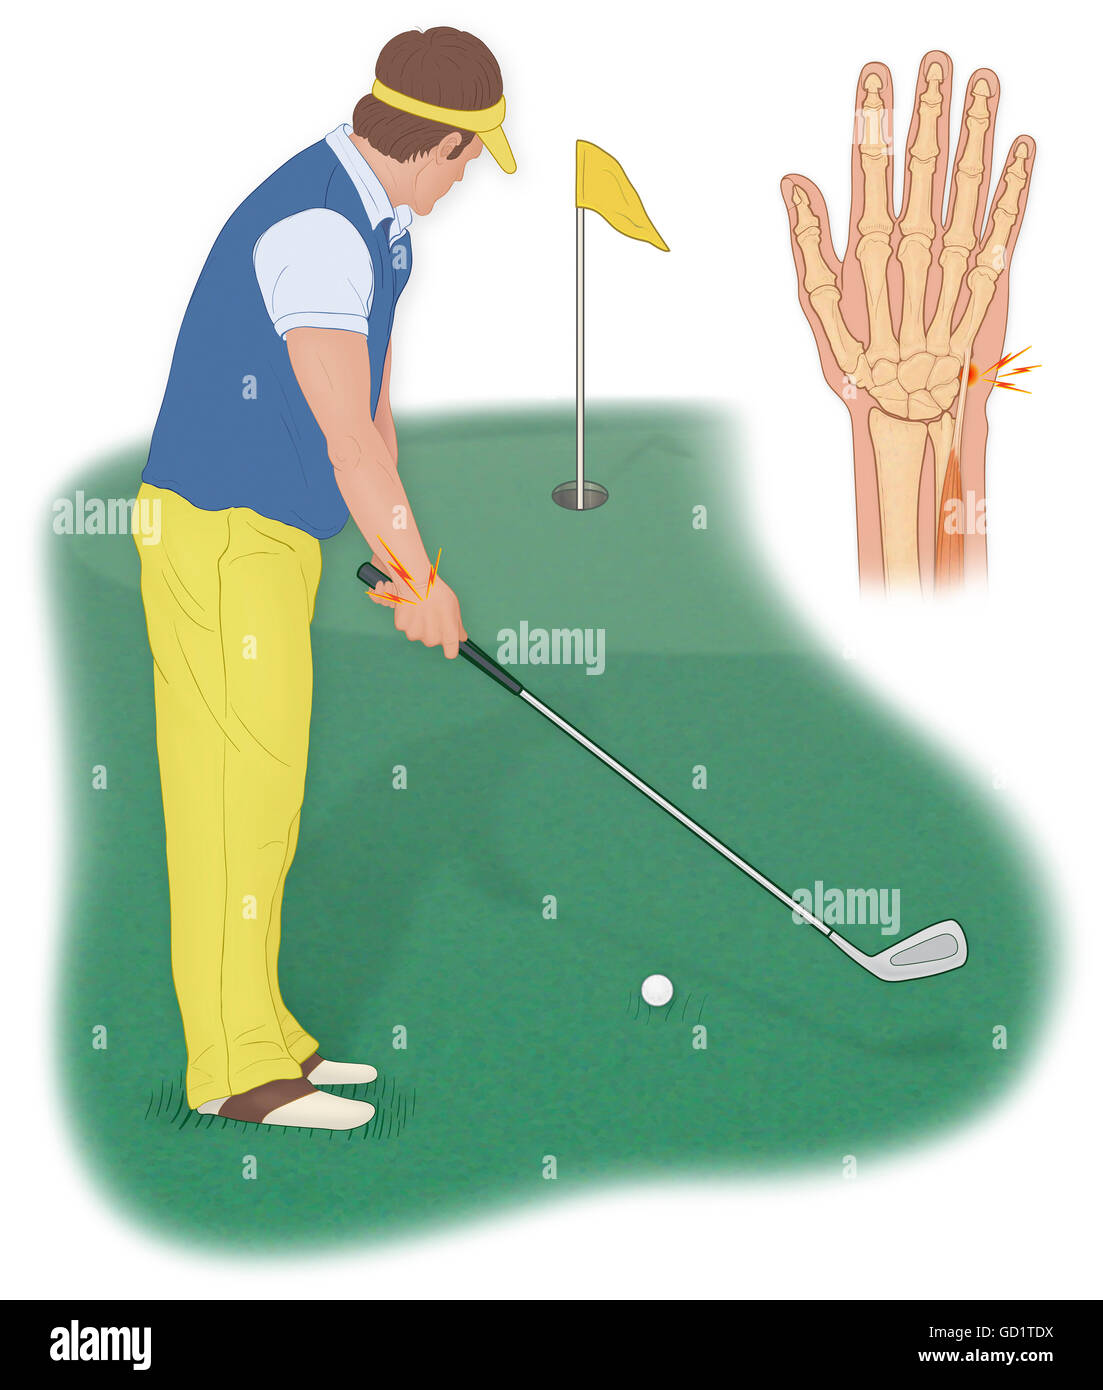 A golfer can develop an acute extensor carpi ulnaris tendinitis injury from improper grip of a golf club and over use Stock Photo